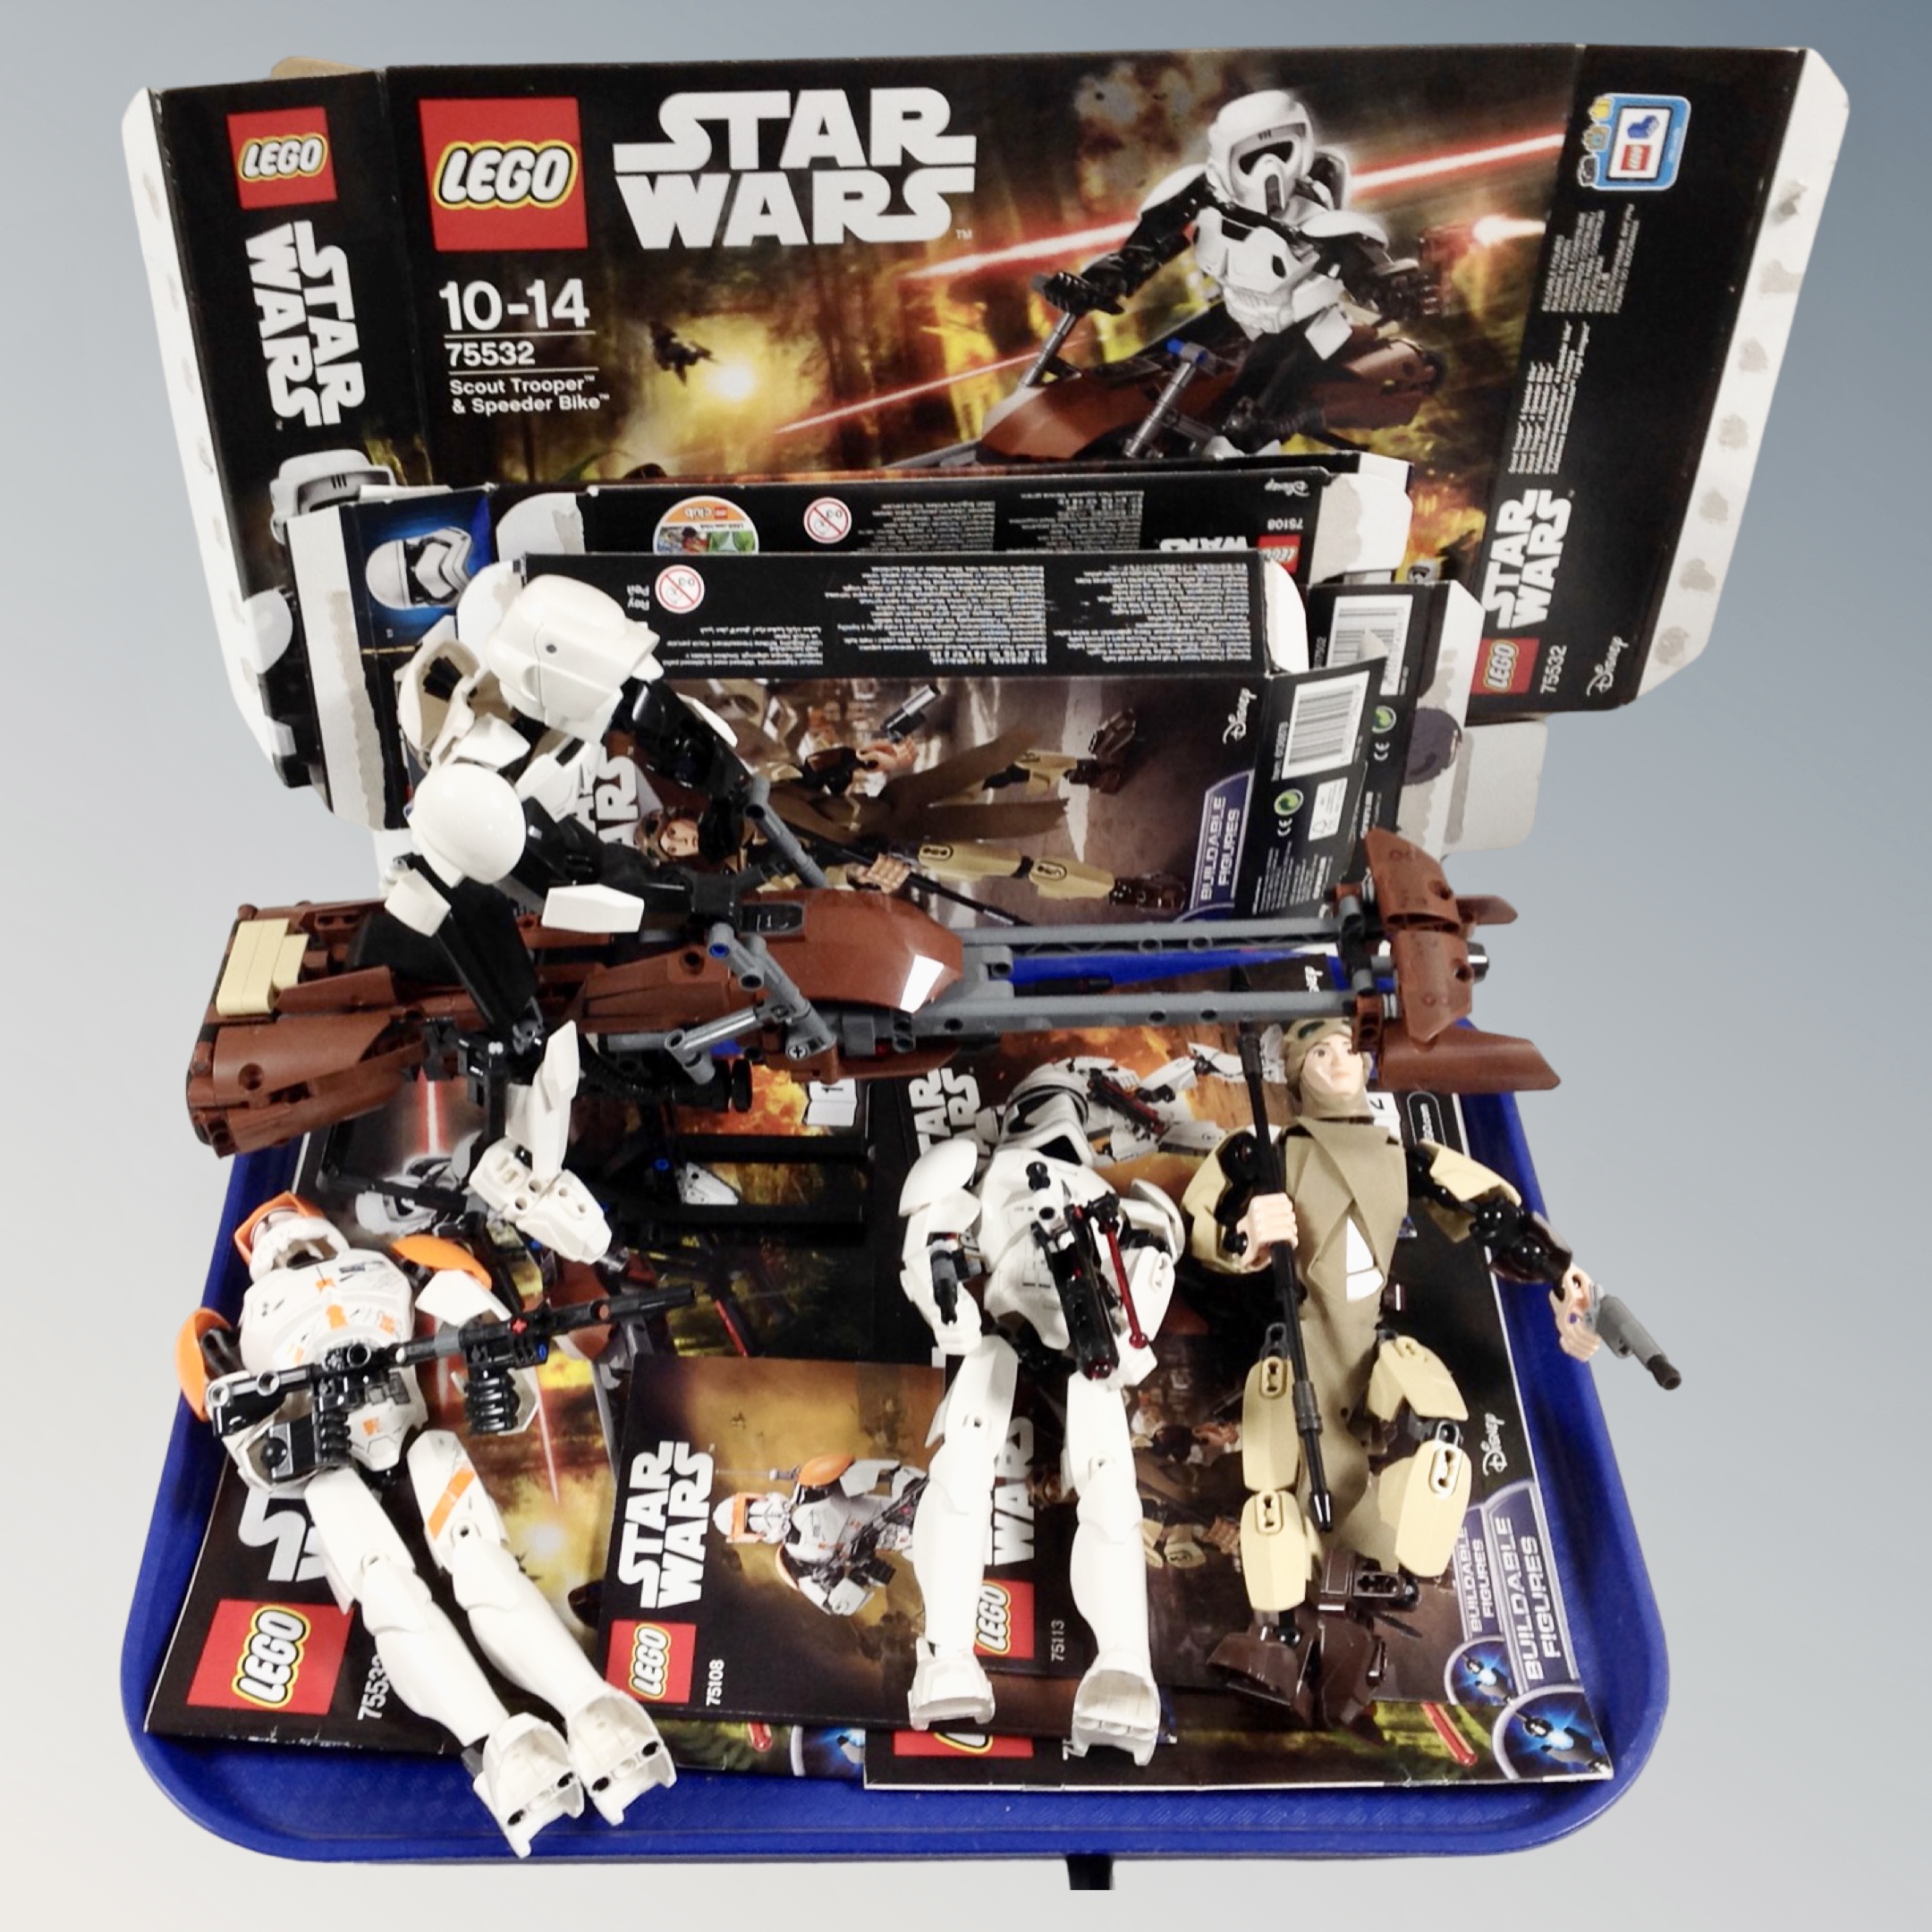 Four Lego Star Wars buildable figures; 75532 Scout Trooper and Speeder, 75113 Rey,